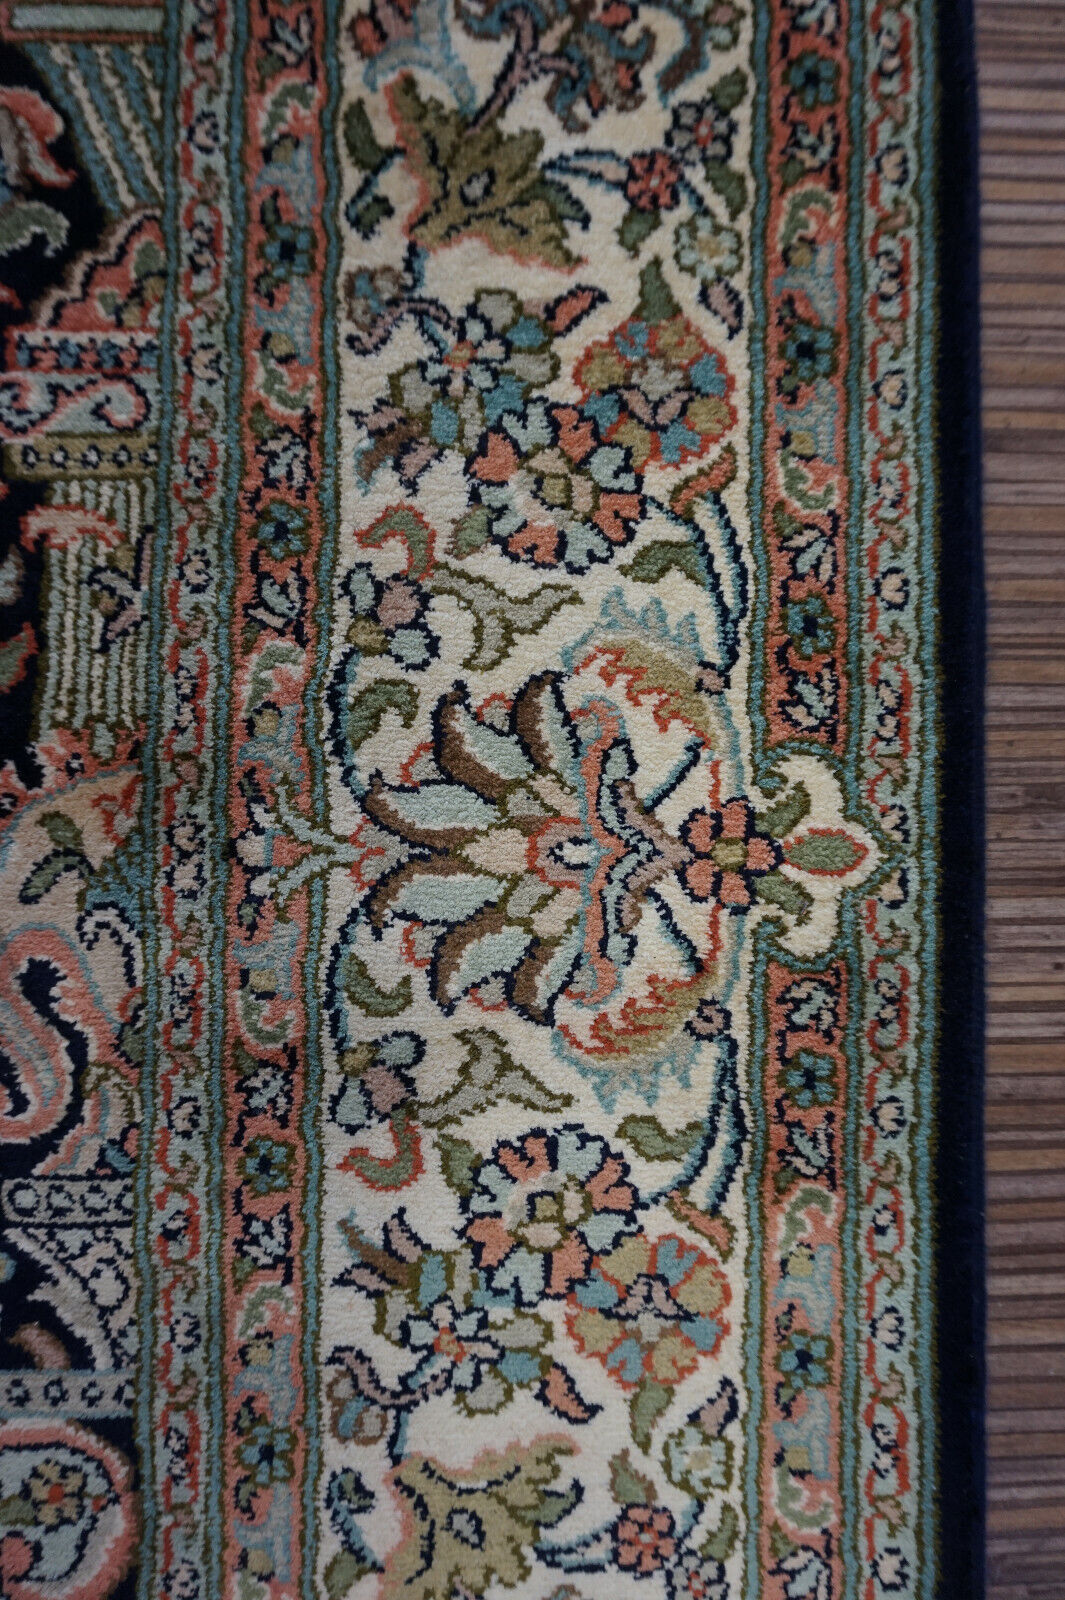 Overhead shot of the Handmade Vintage Persian Kashmir Rug displaying size and dimensions